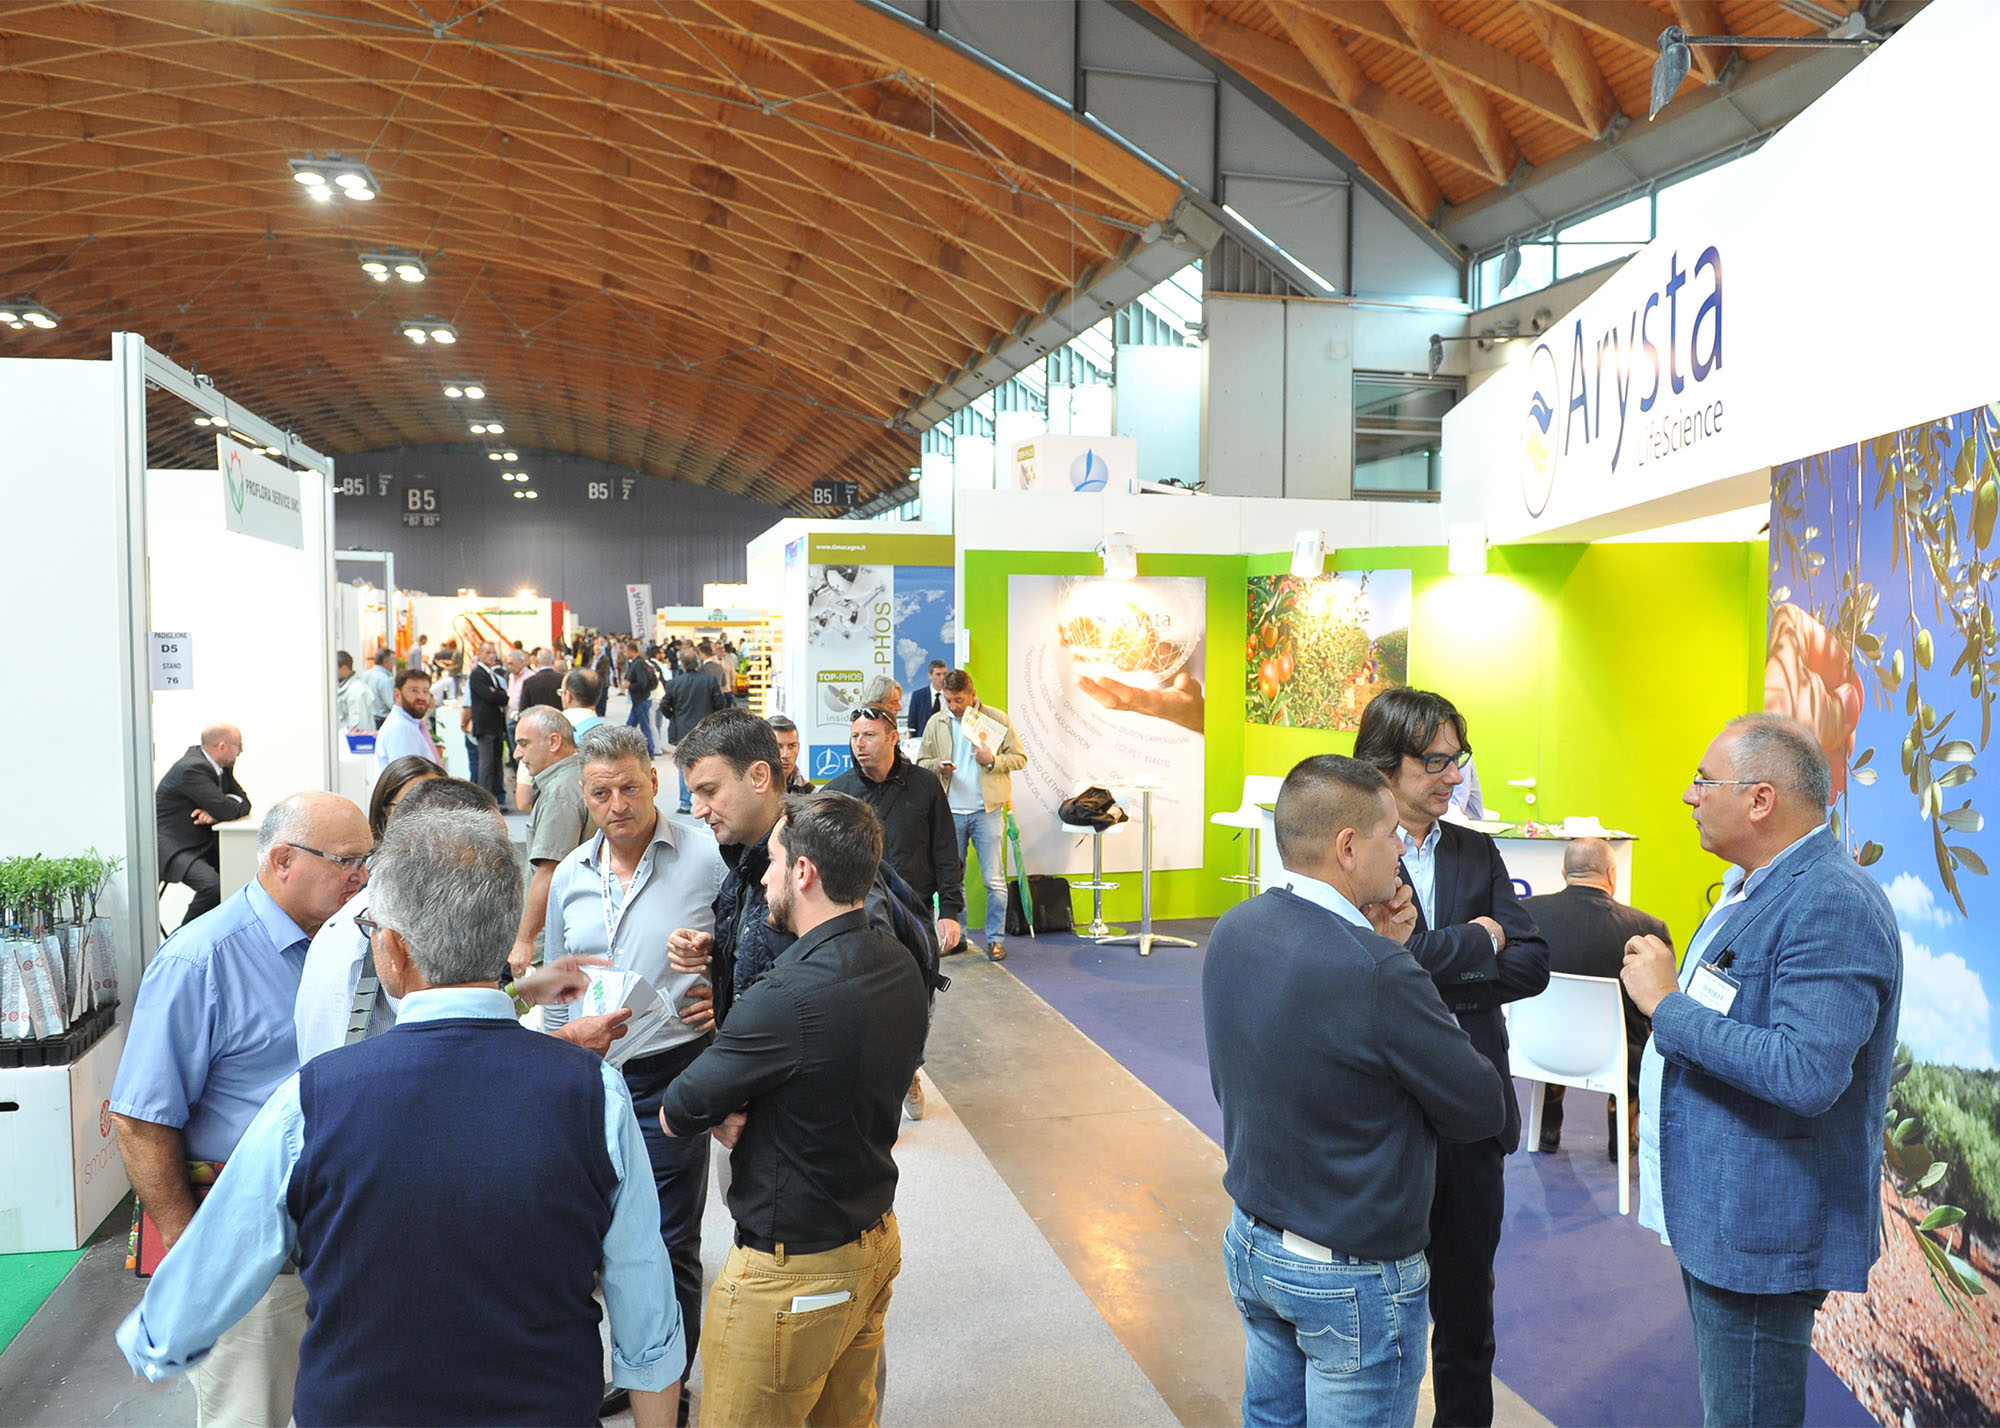 The increasingly international Macfrut trade fair attracted major foreign delegations and will now be followed by the new Mac Fruit Attraction event in Egypt in May.